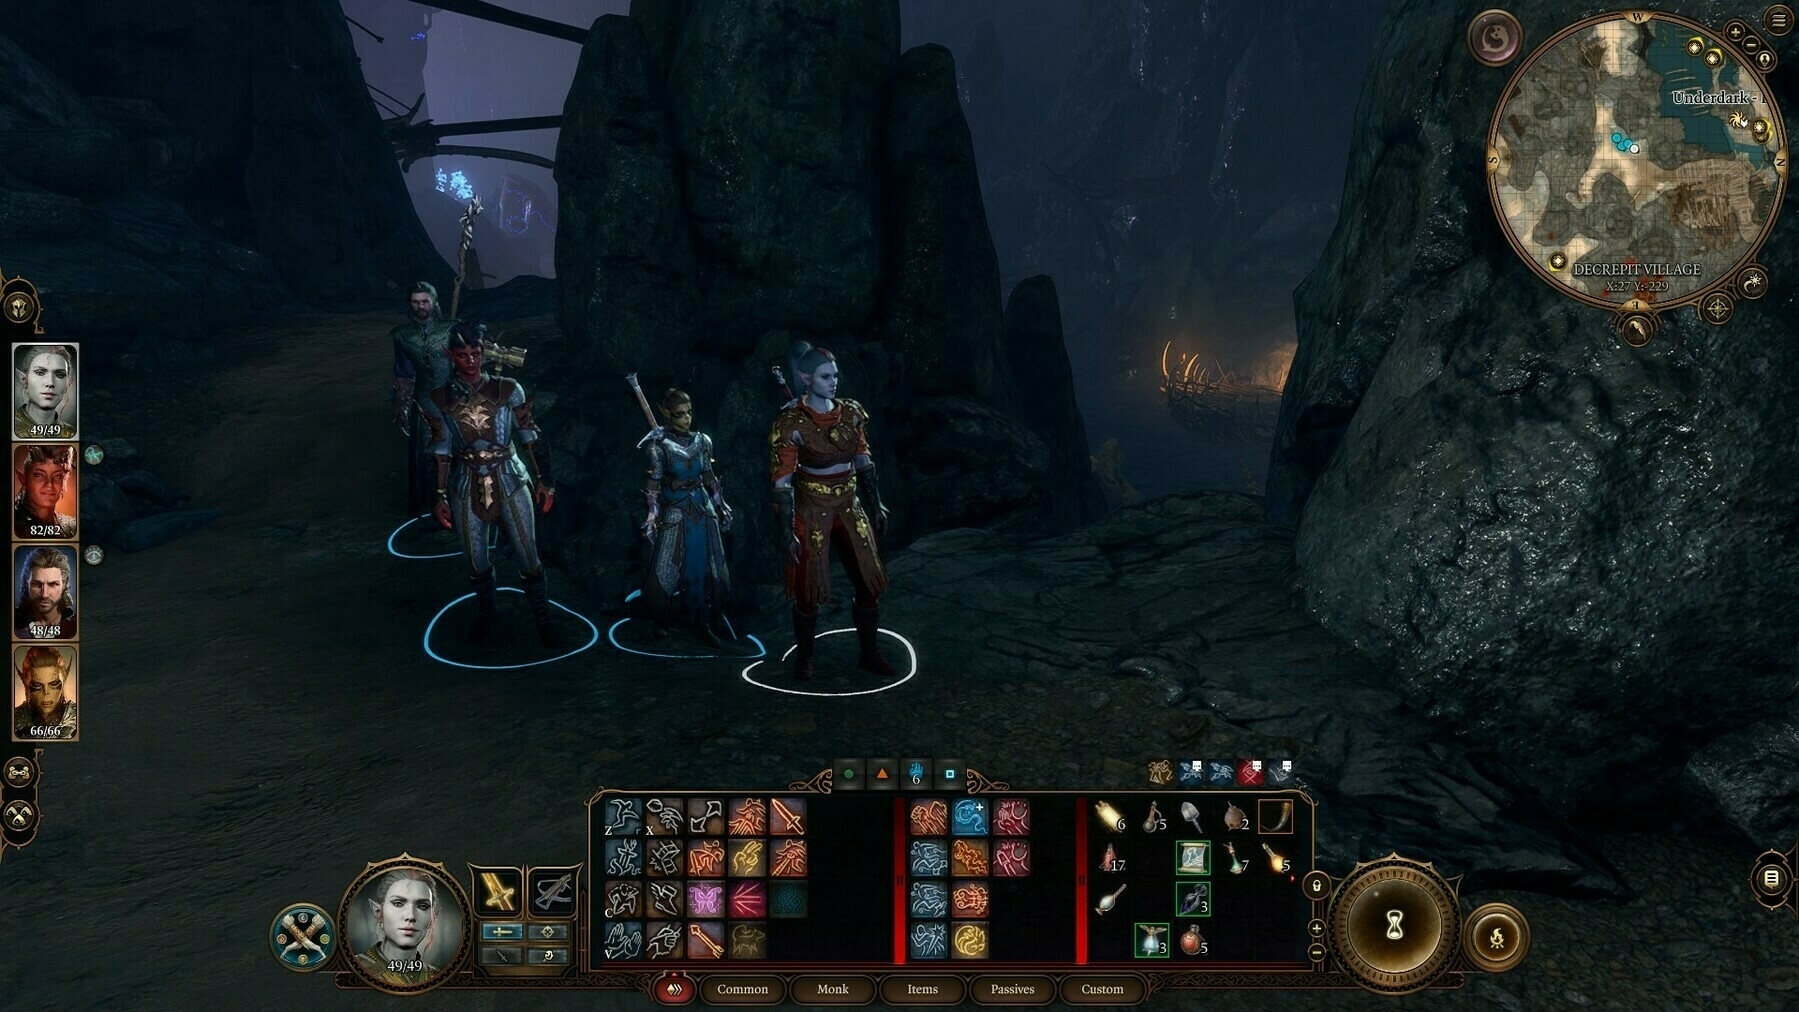 Chi's character leading a 4-member party, with the following members included: a Githyanki Warrior named Lae'zel, a Barbarian tiefling named Karlach, and a Warlock named Gale. Their party is found in some dark depths. The game interface is also visible and expanded, showing Chi's numerous options and items that are ready to use.